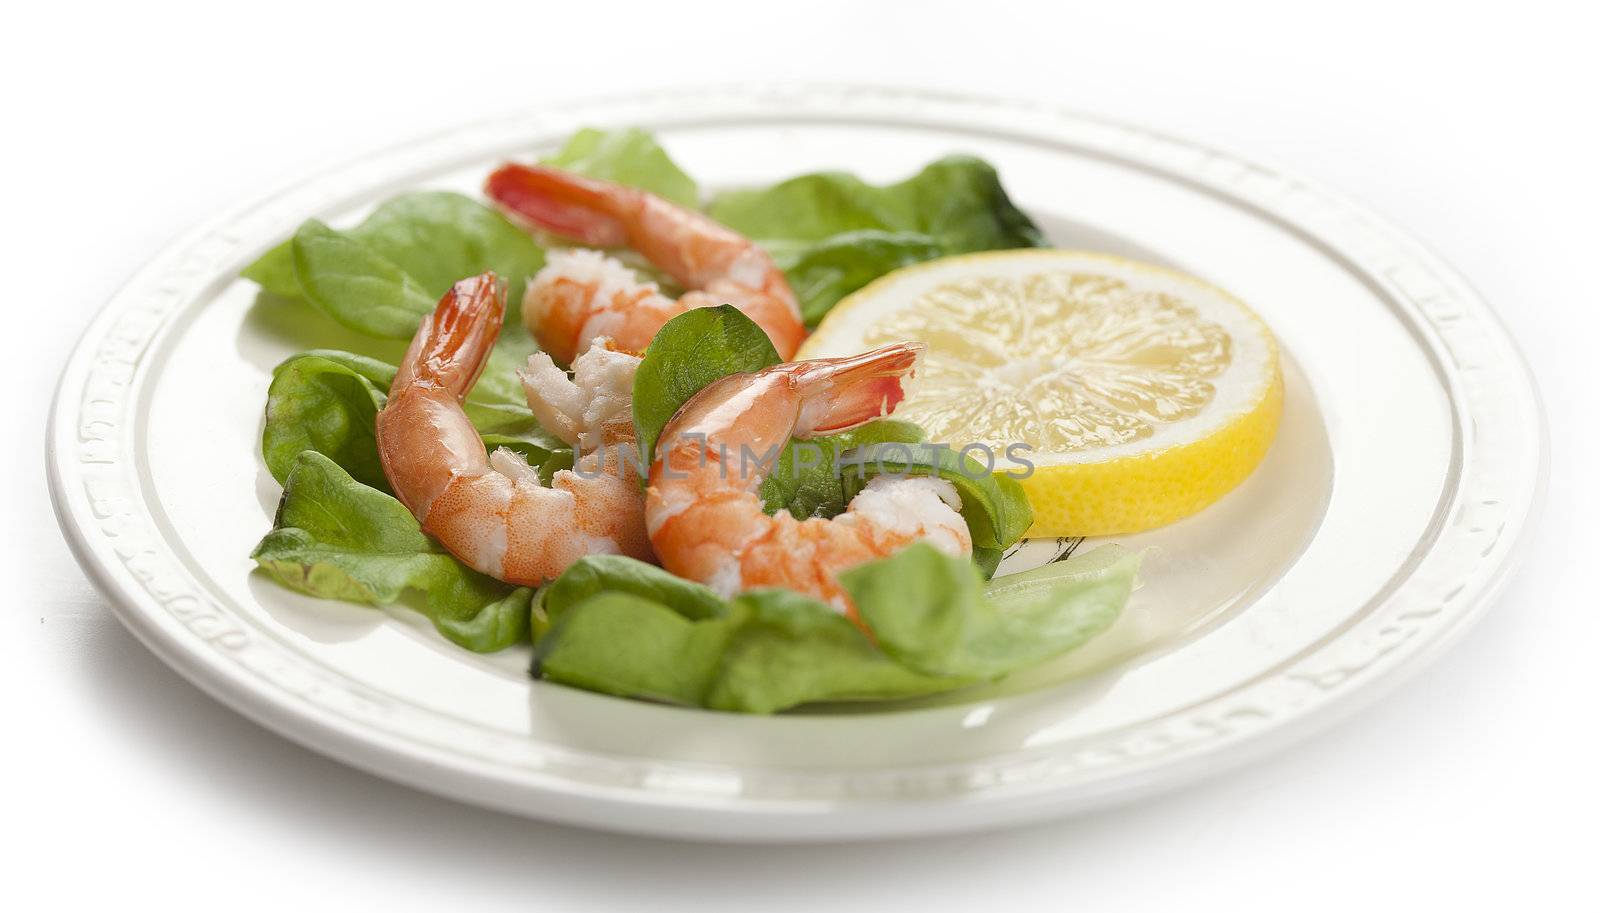 Three shrimp's tails with leek, lettuce and lemon on the white plate